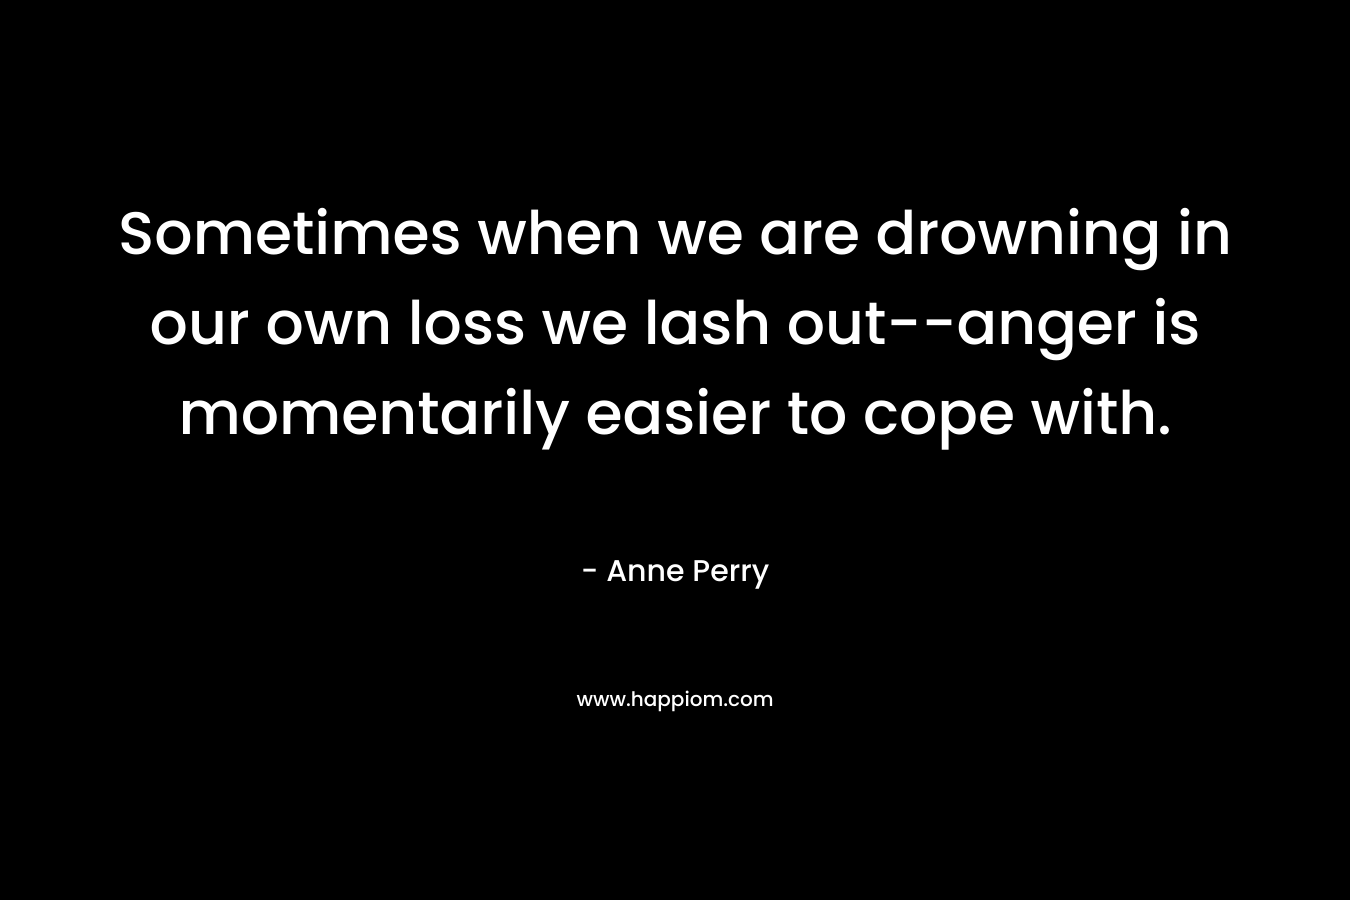 Sometimes when we are drowning in our own loss we lash out–anger is momentarily easier to cope with. – Anne Perry